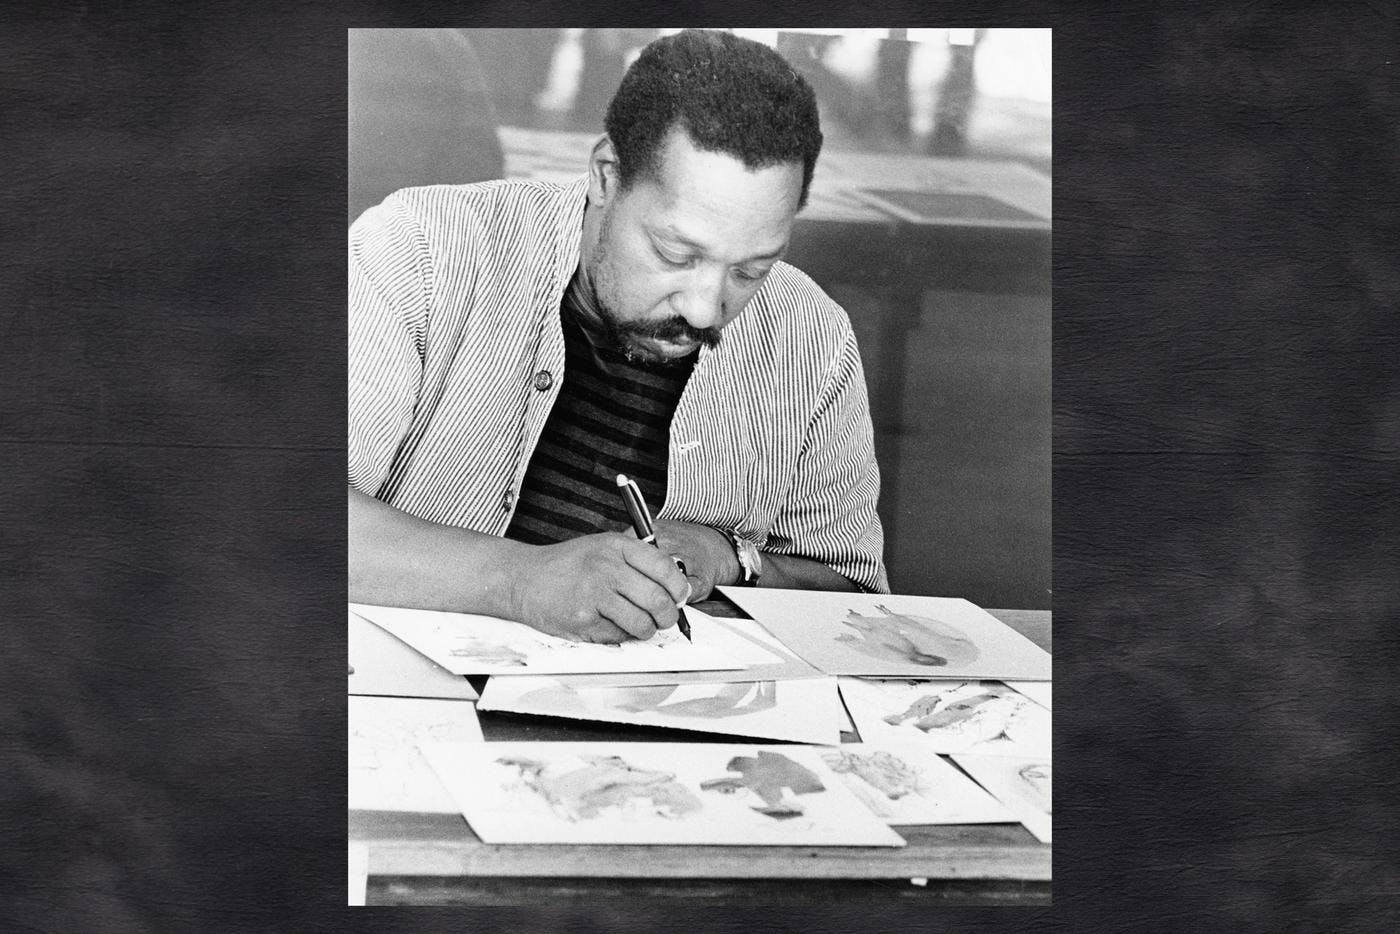 A vintage black and white photo of a man drawing